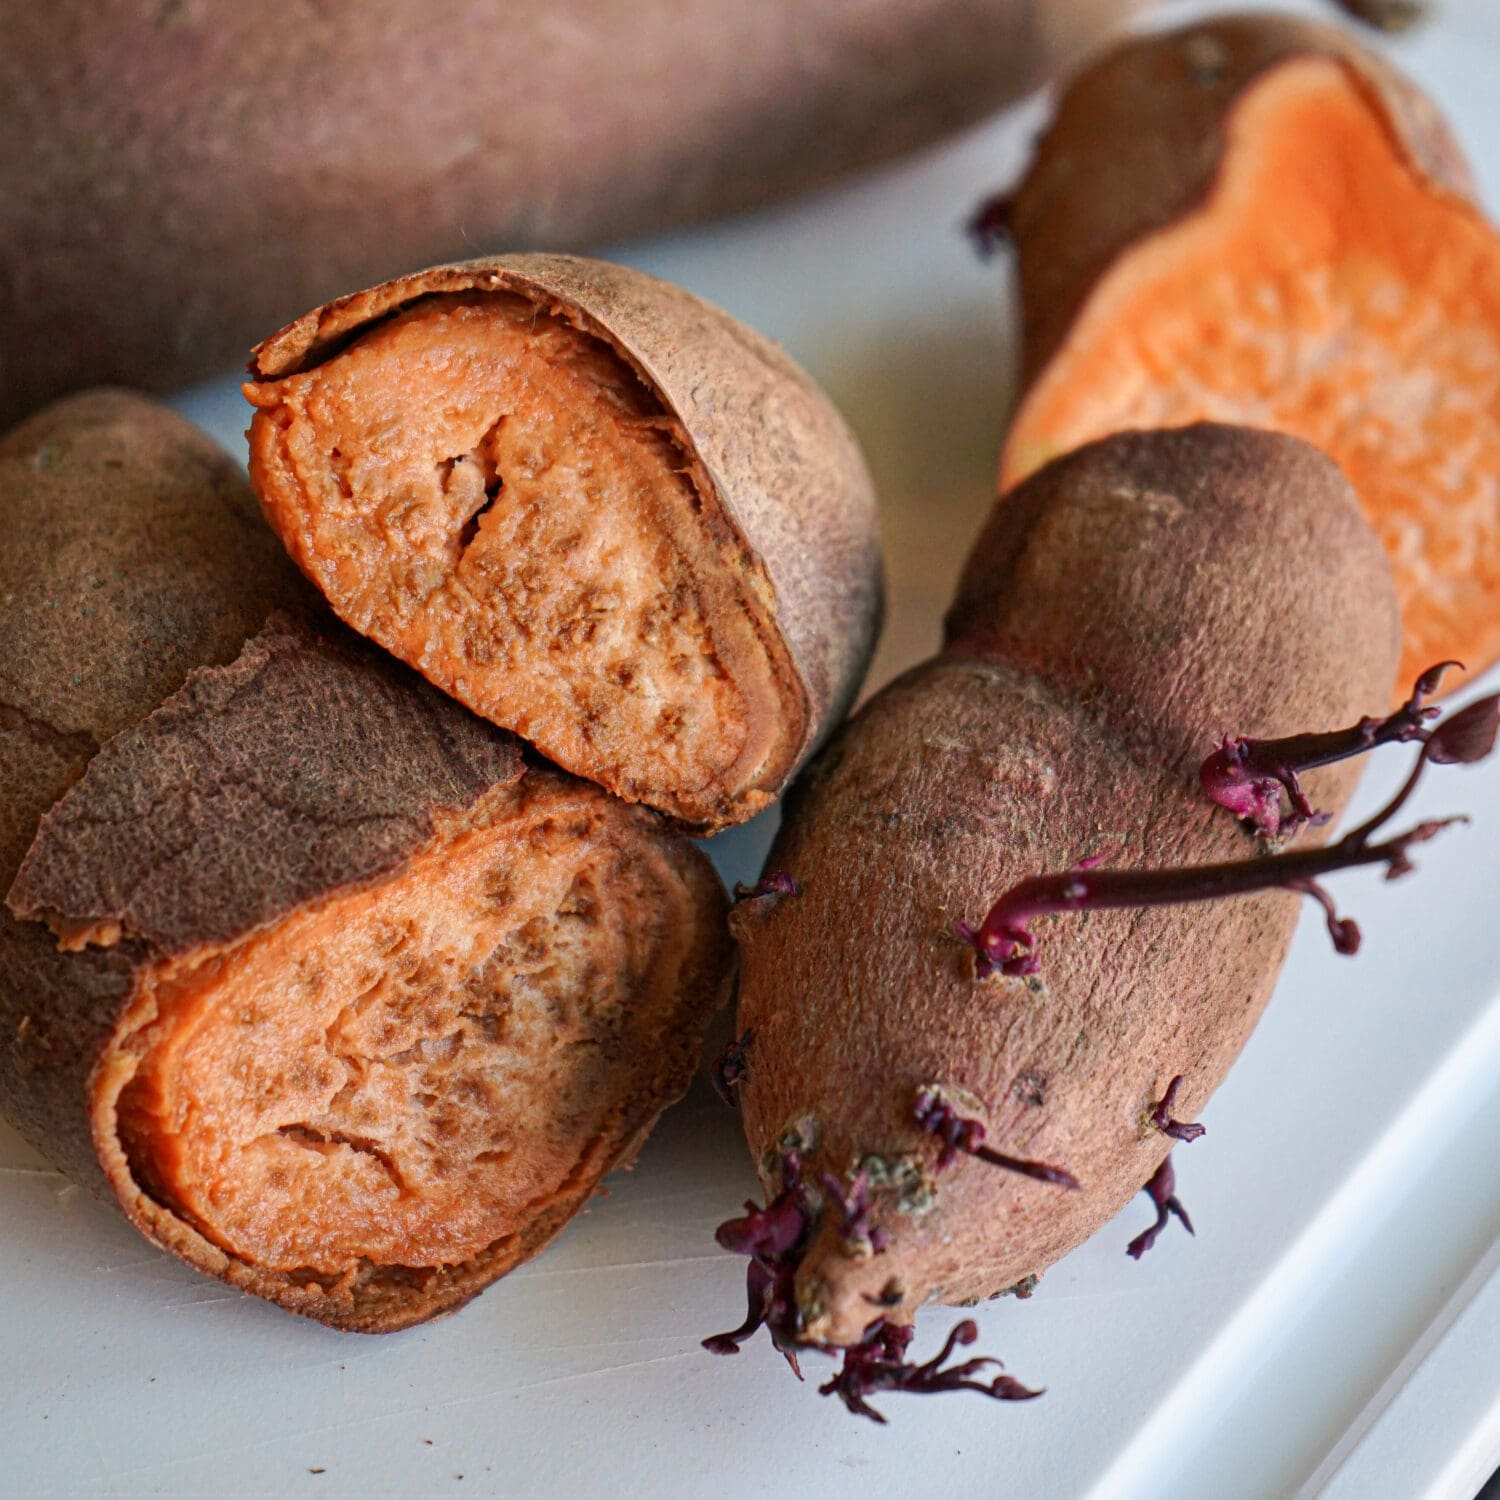 How To Tell If A Sweet Potato Is Bad